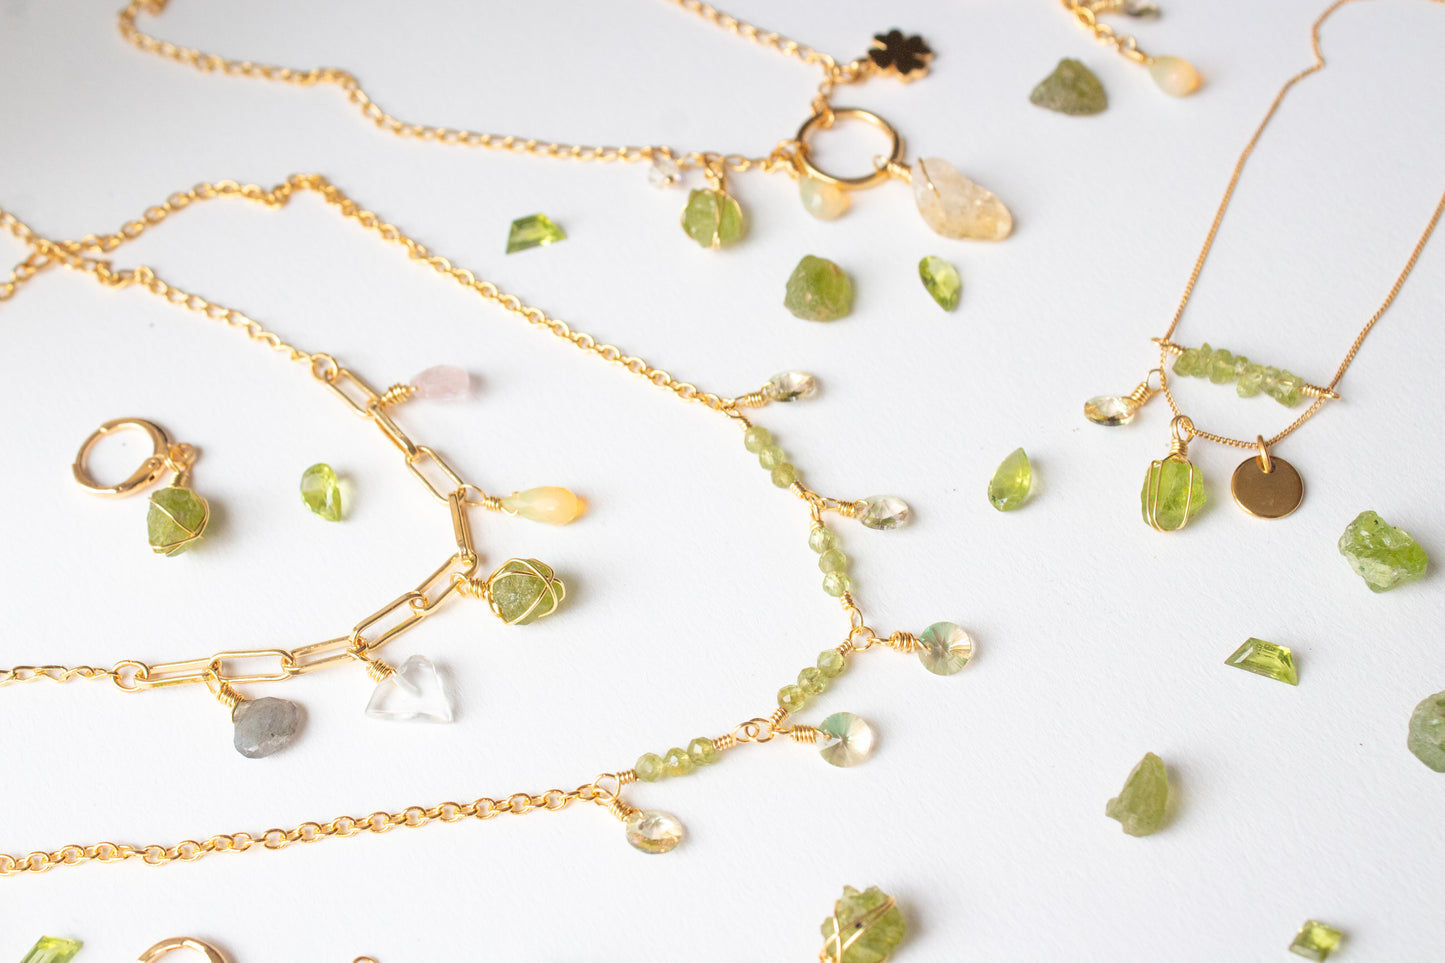 Radiance. Necklace with peridot and swarovskis 